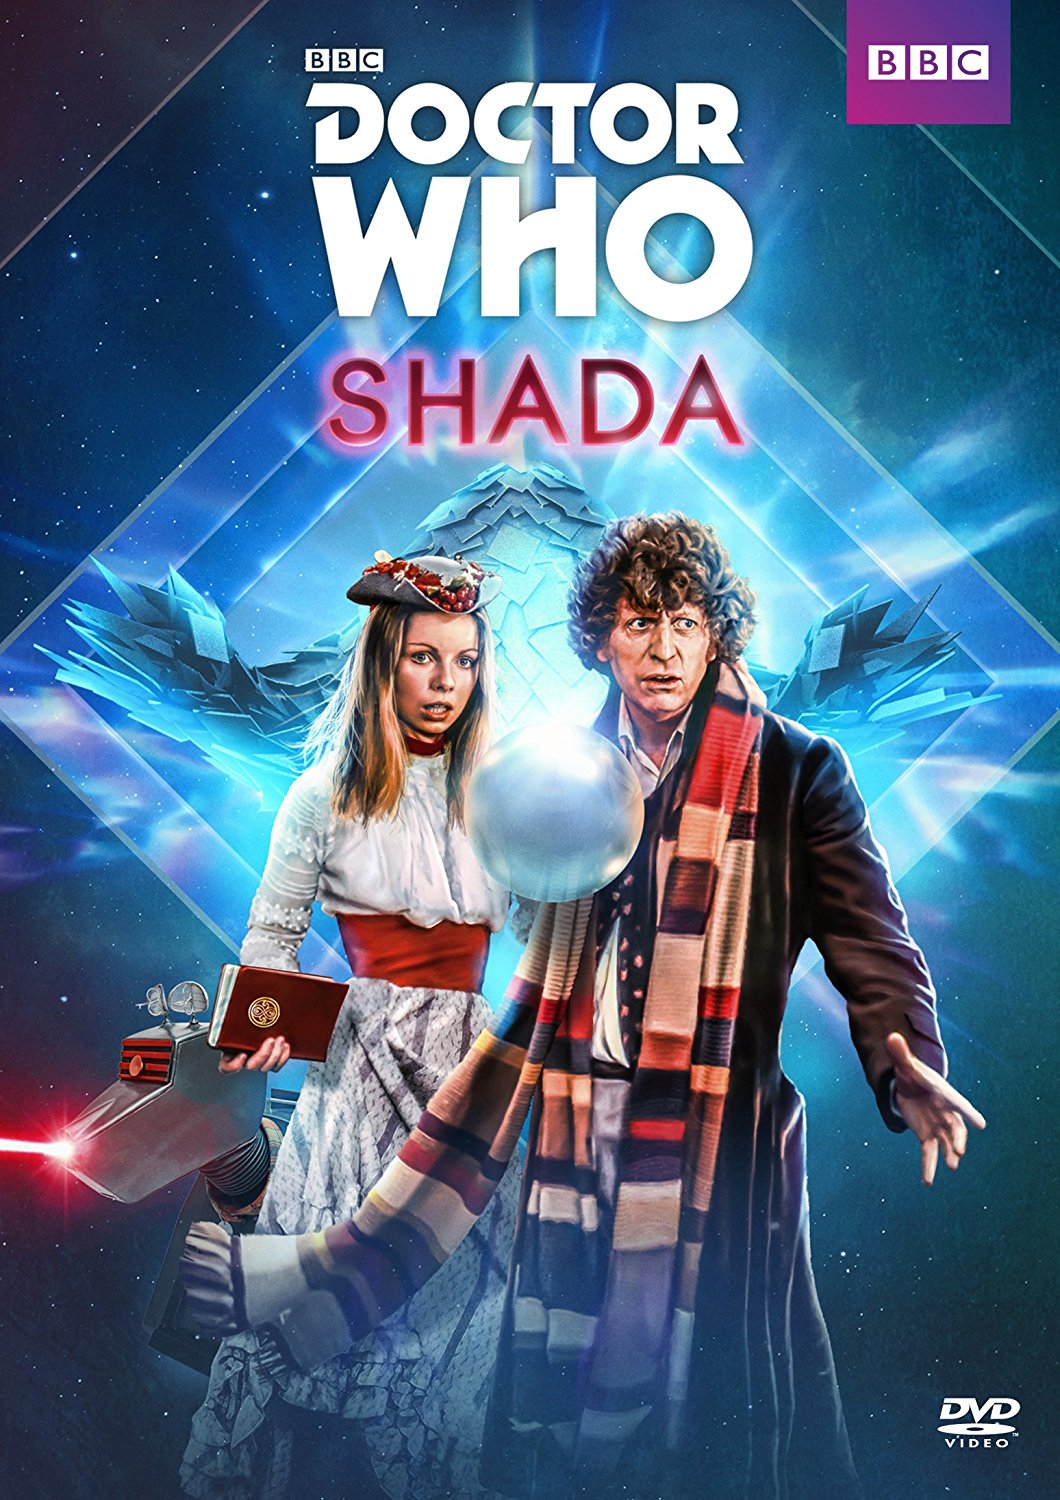 DVD cover for long lost Doctor Who episode 109, Shada